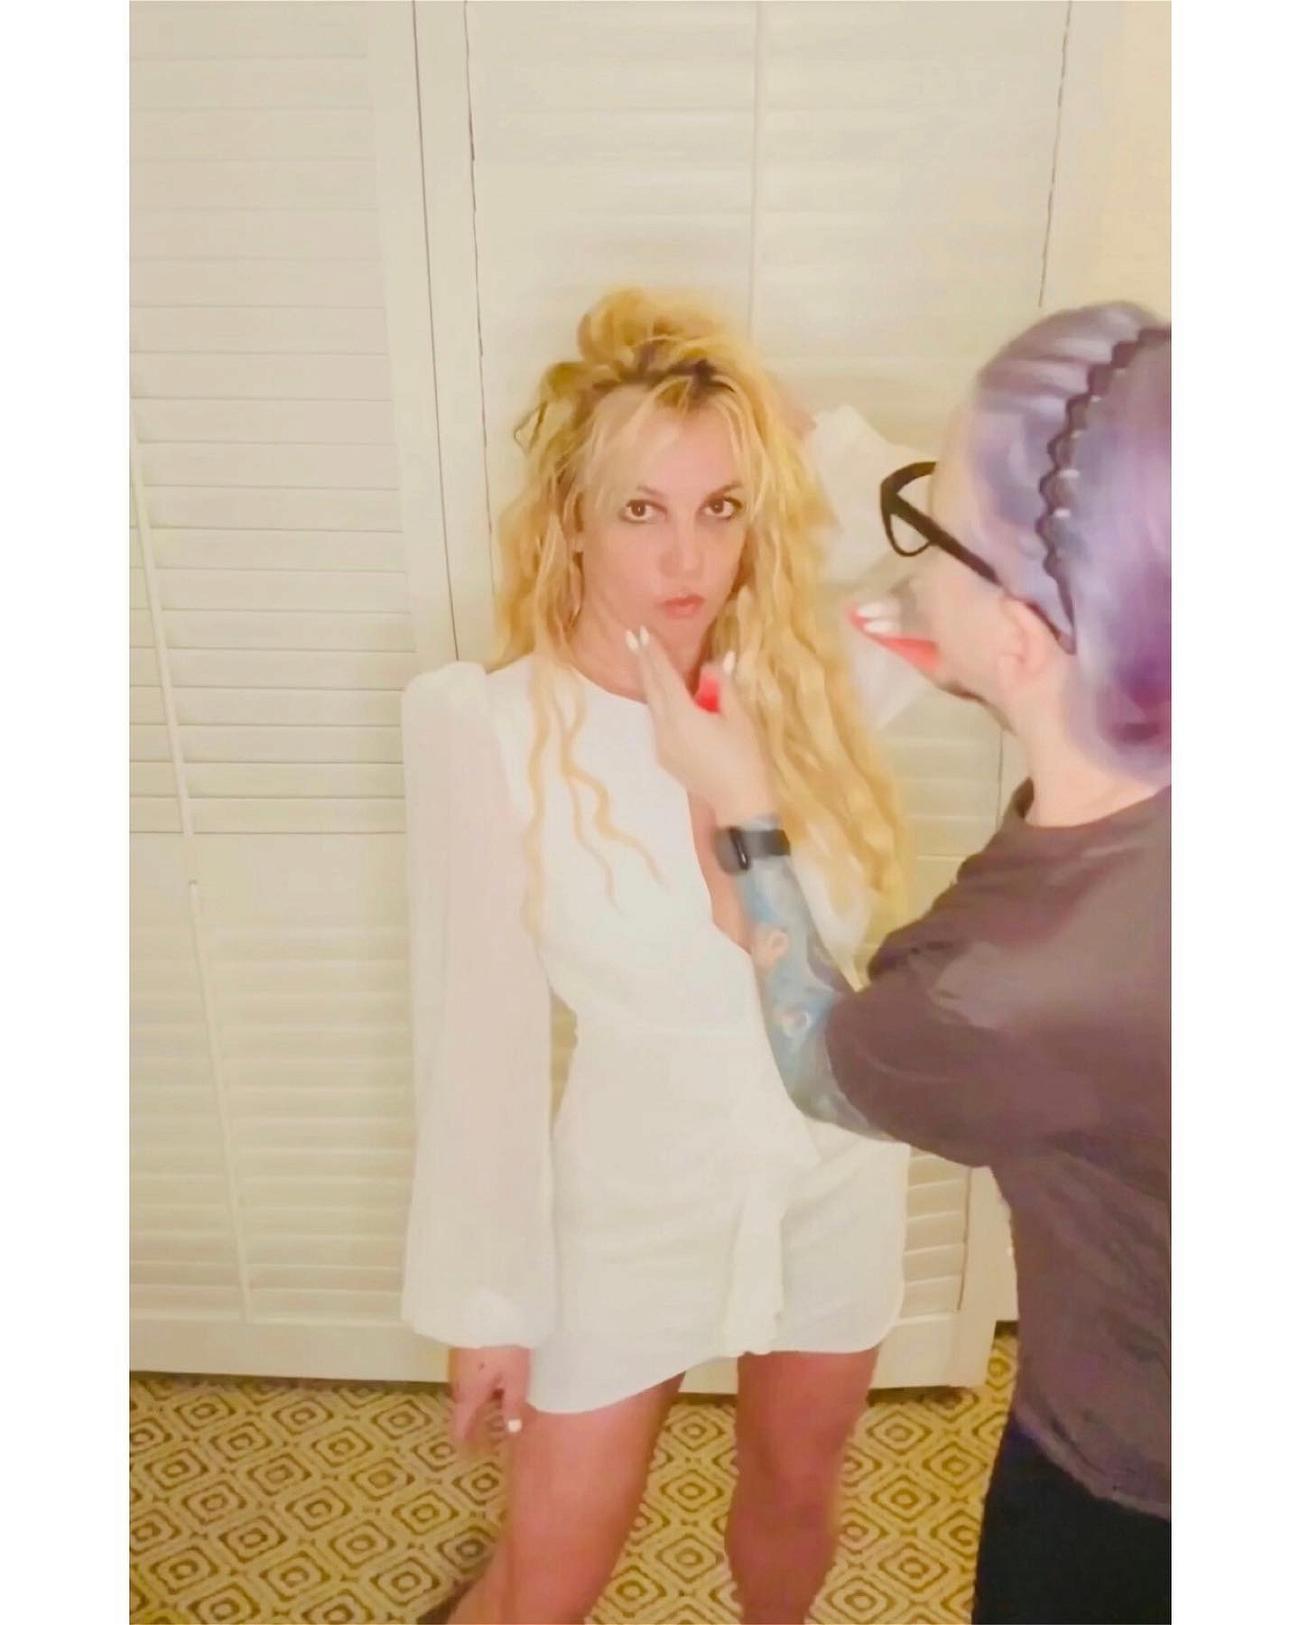 Britney Spears gets her makeup done in Hawaii